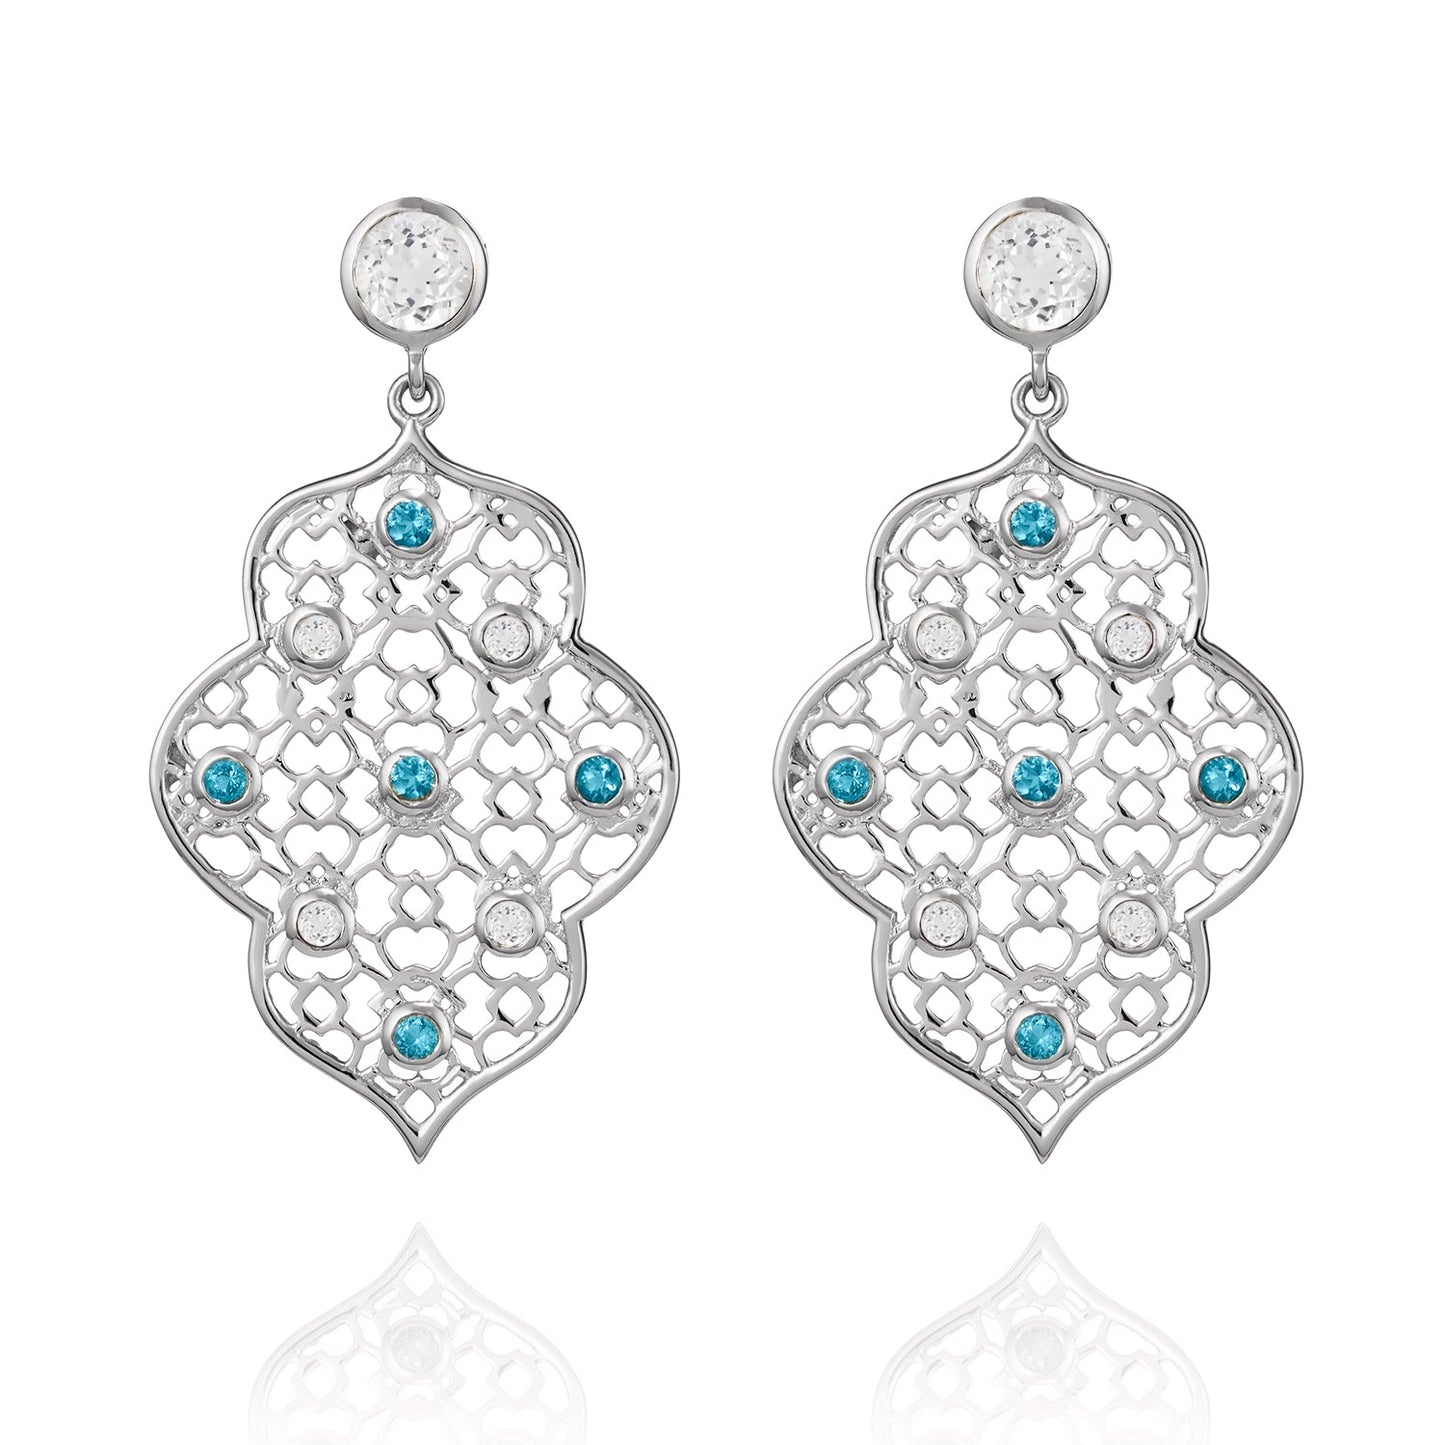 Silver Filigree Earrings in White Topaz & Blue Topaz | The Andalusian Collection | Augustine Jewels